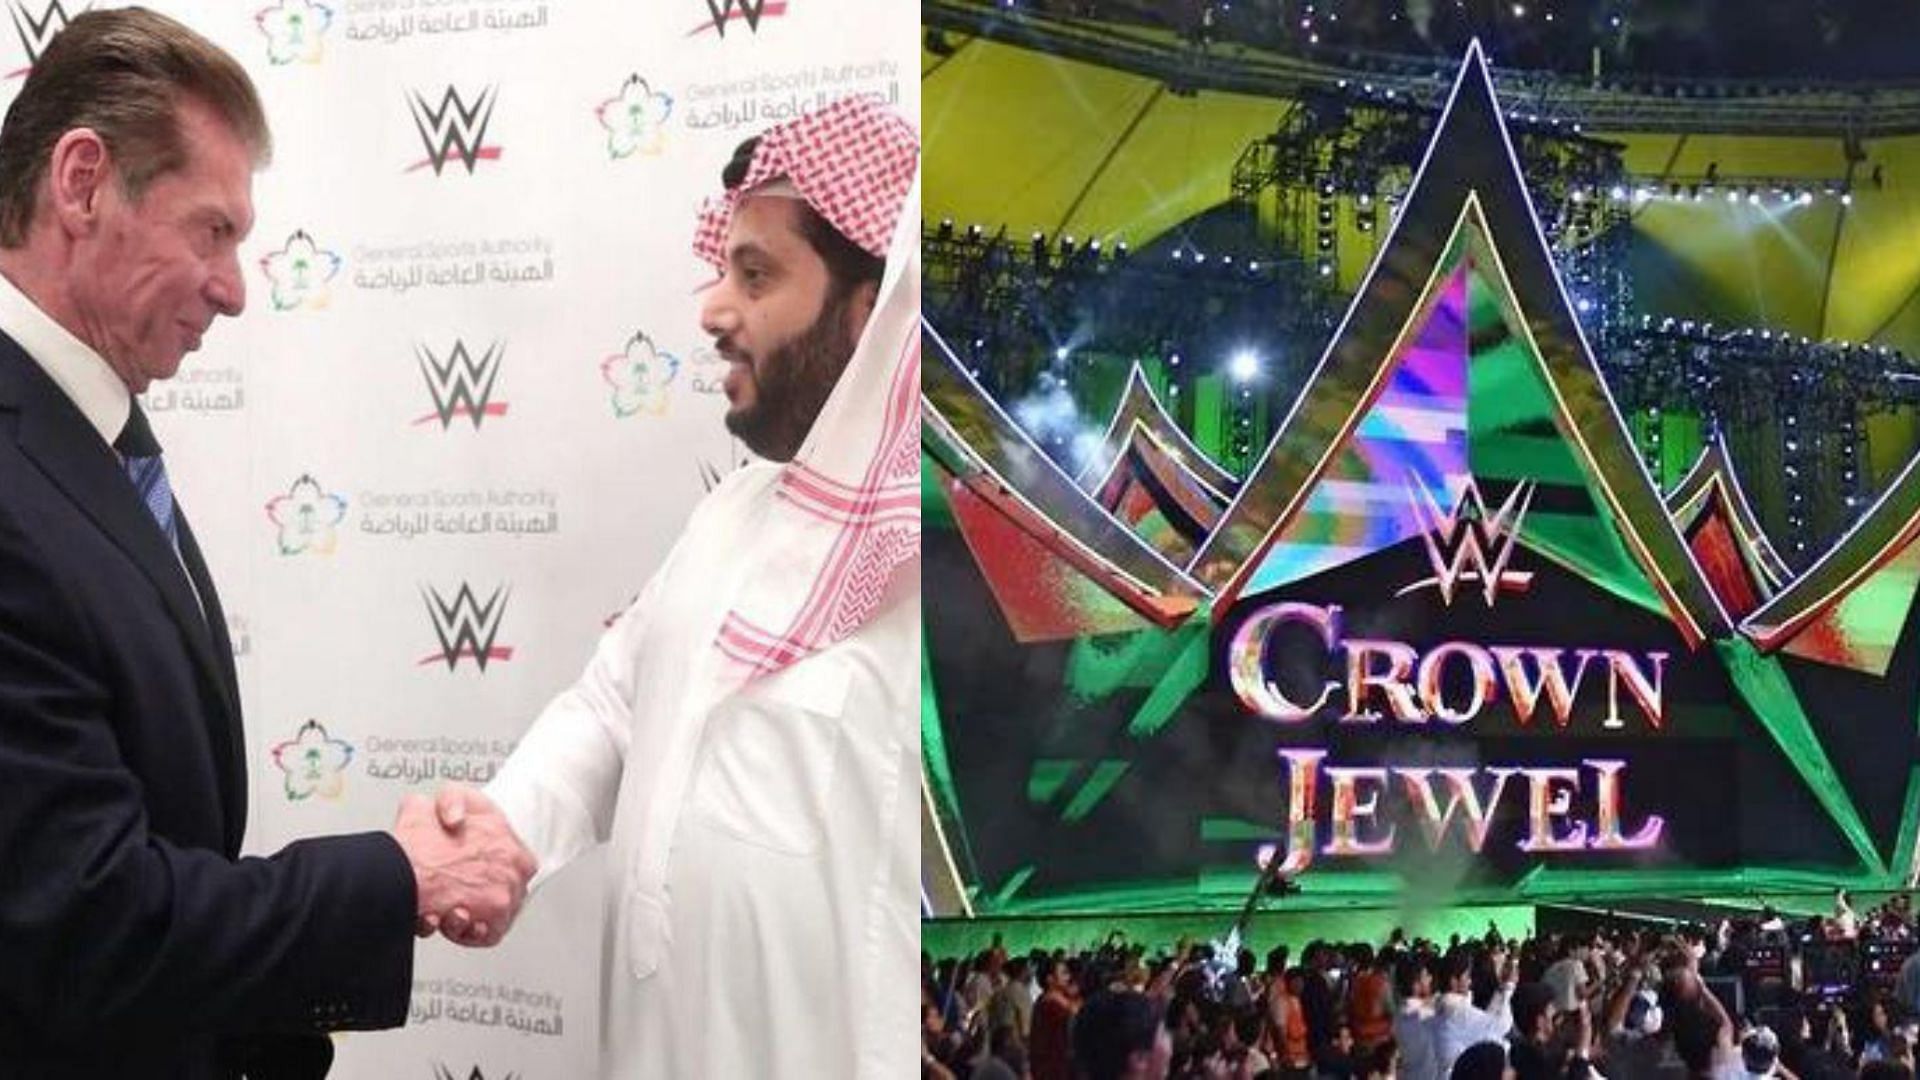 Some insights about the WWE Saudi Arabia deal and the perception from it